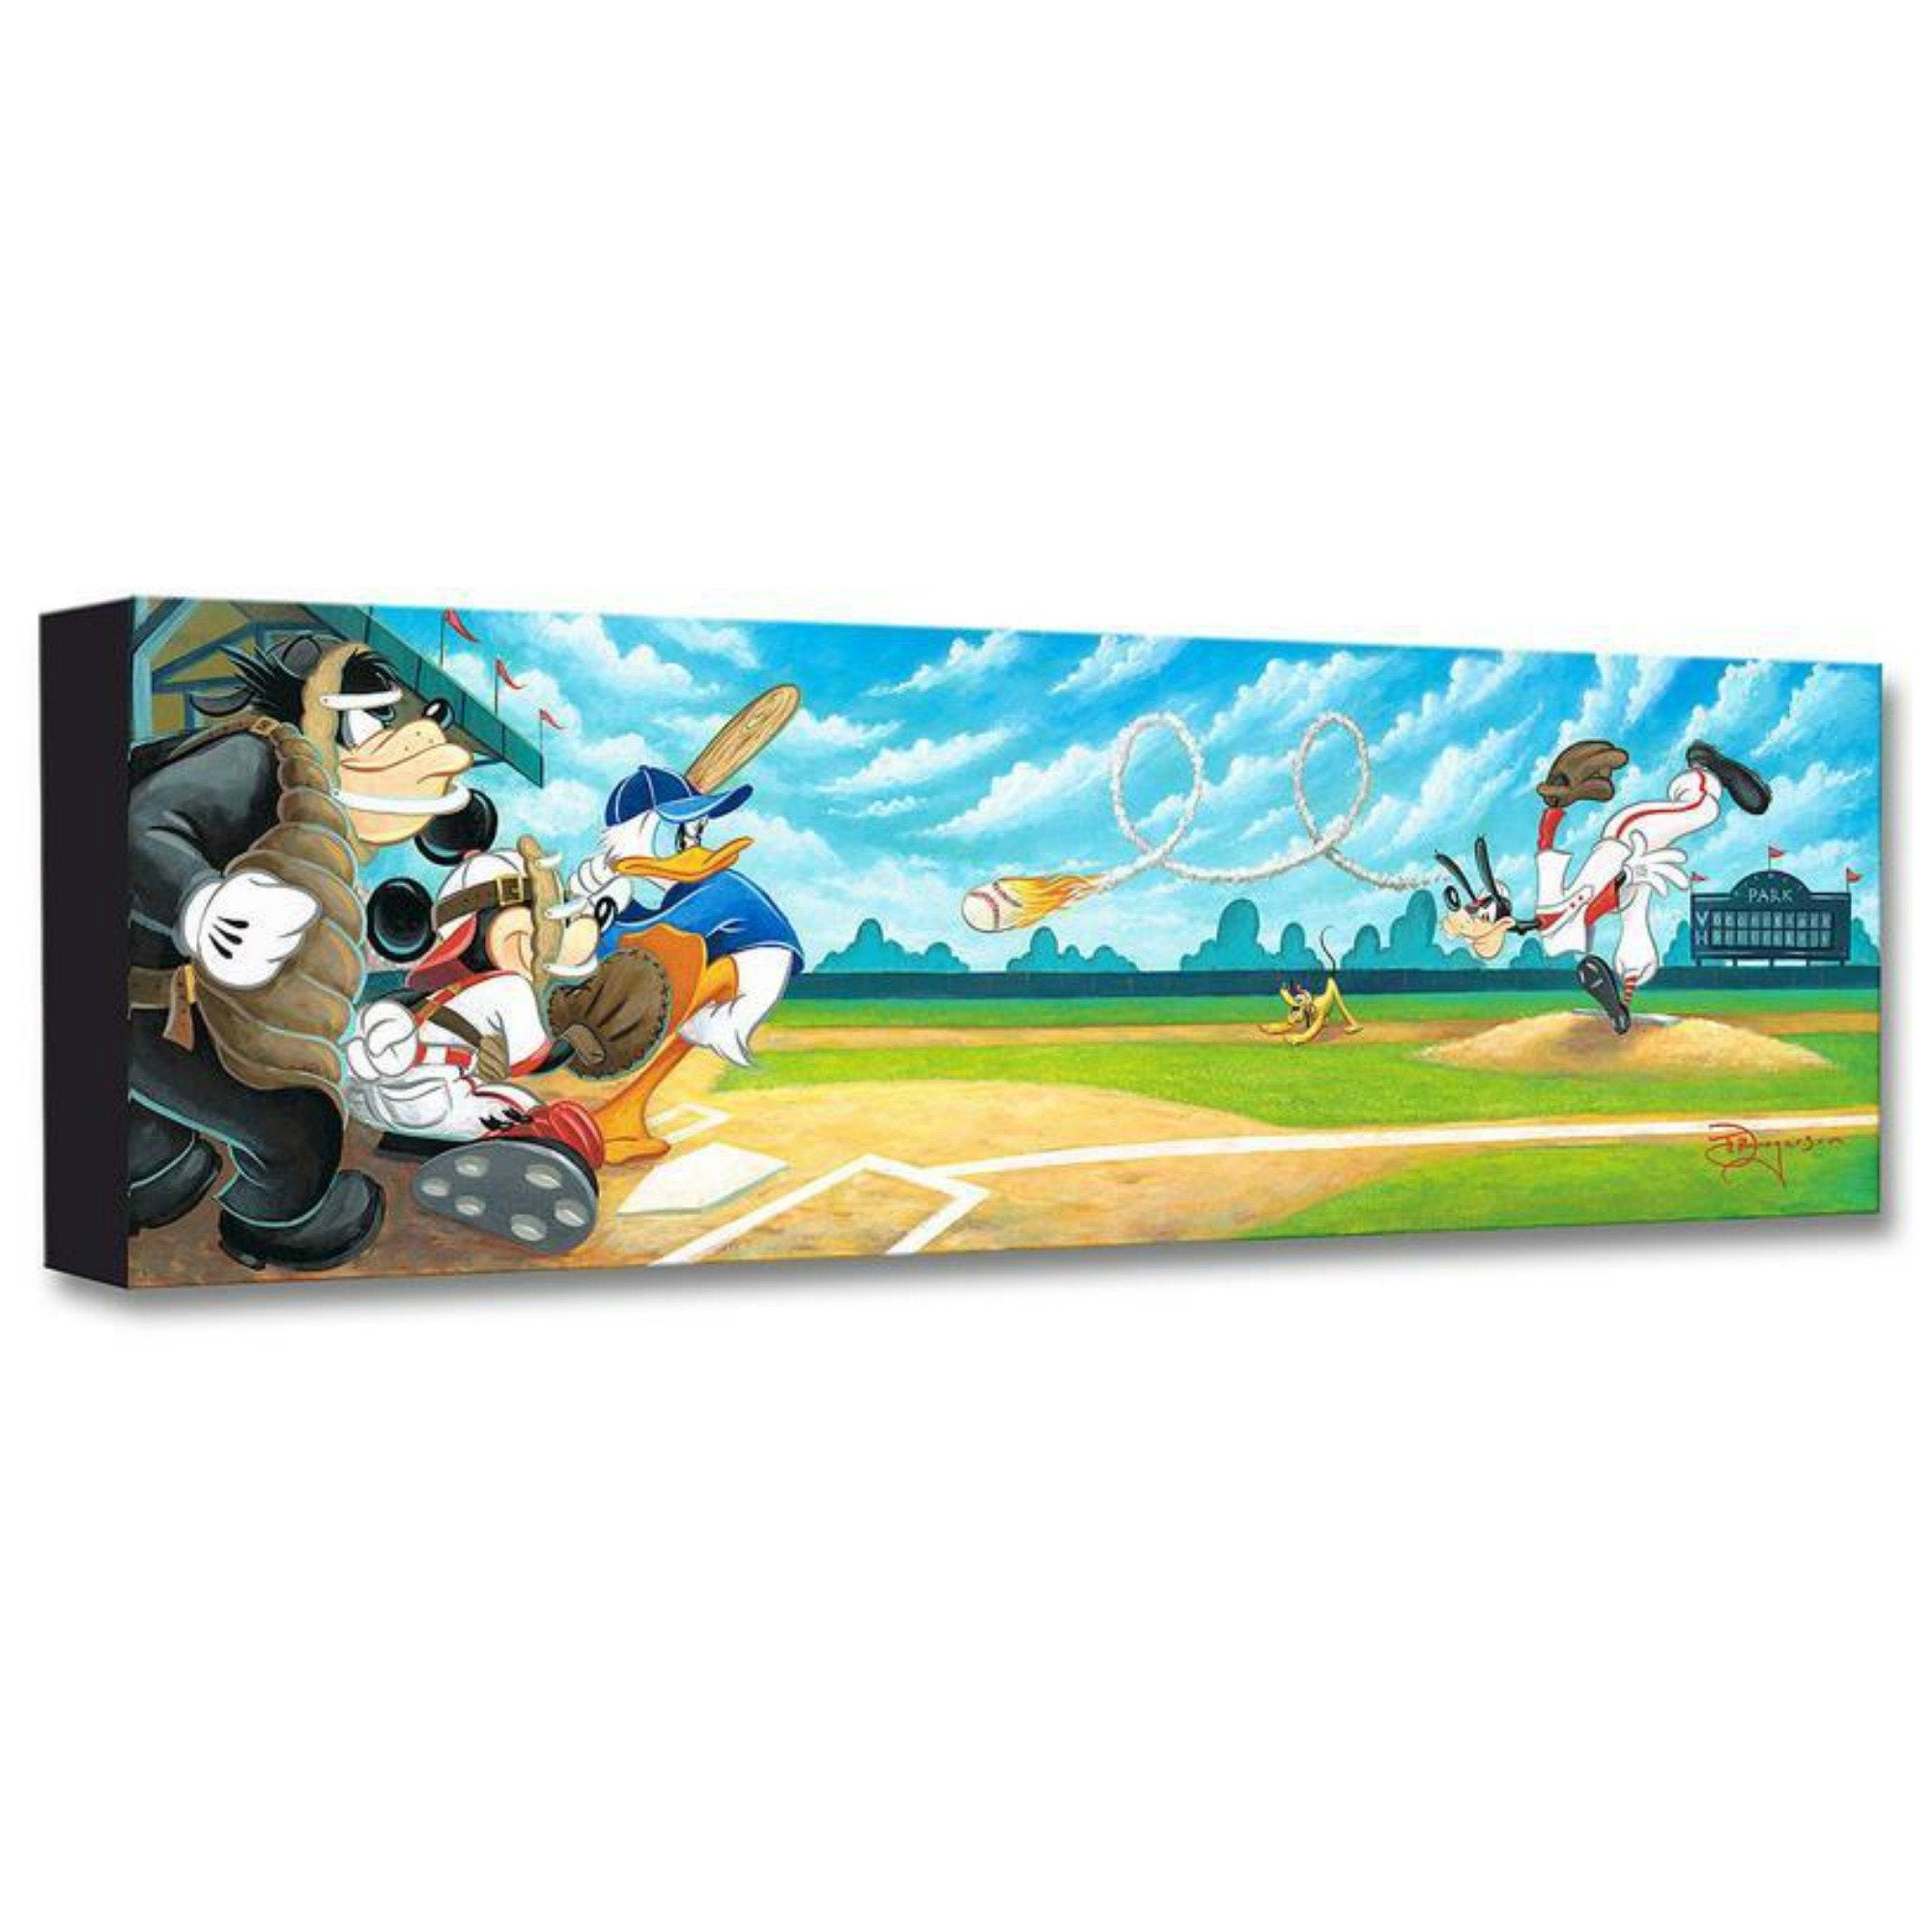 Swing for the Fences by Tim Rogerson  A day at the baseball field, Goofy pitches Donald a swirly ball, with Mickey as the catcher ready to catch if Donald strikes out.